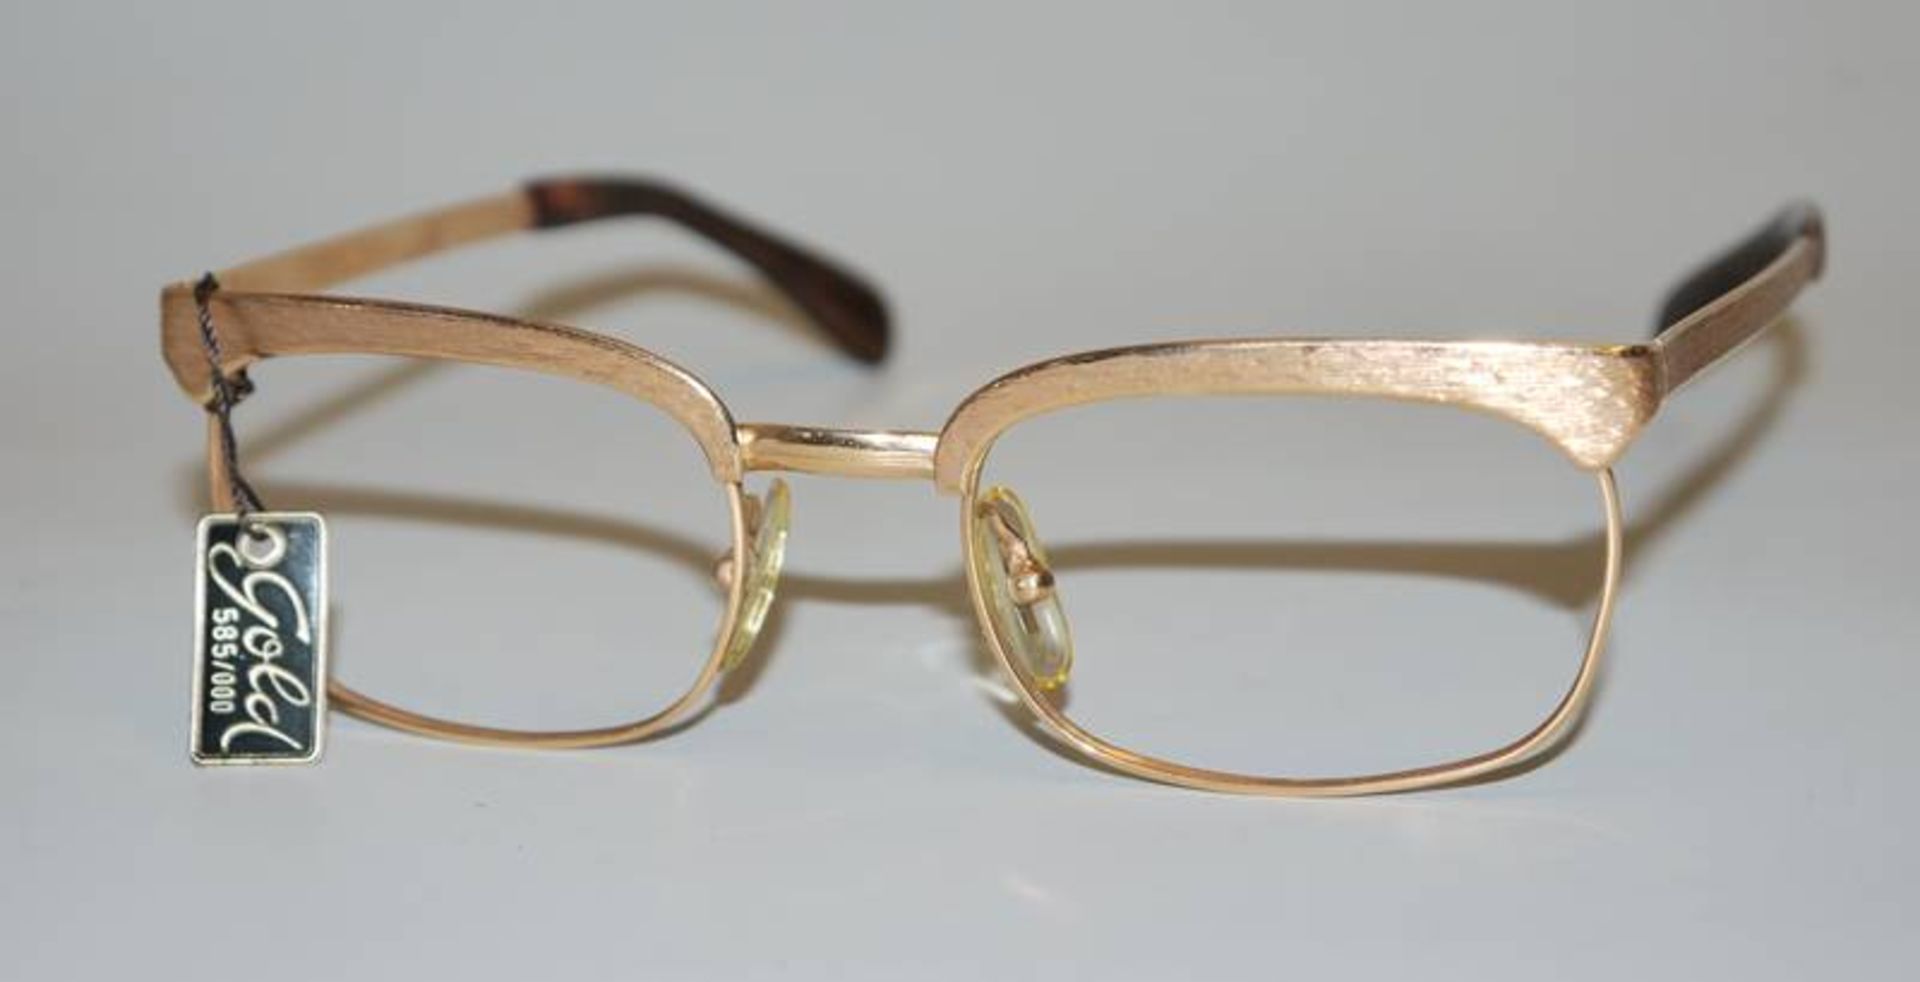 Rarity: 14kt real gold spectacle frame by American Optical, 1960s